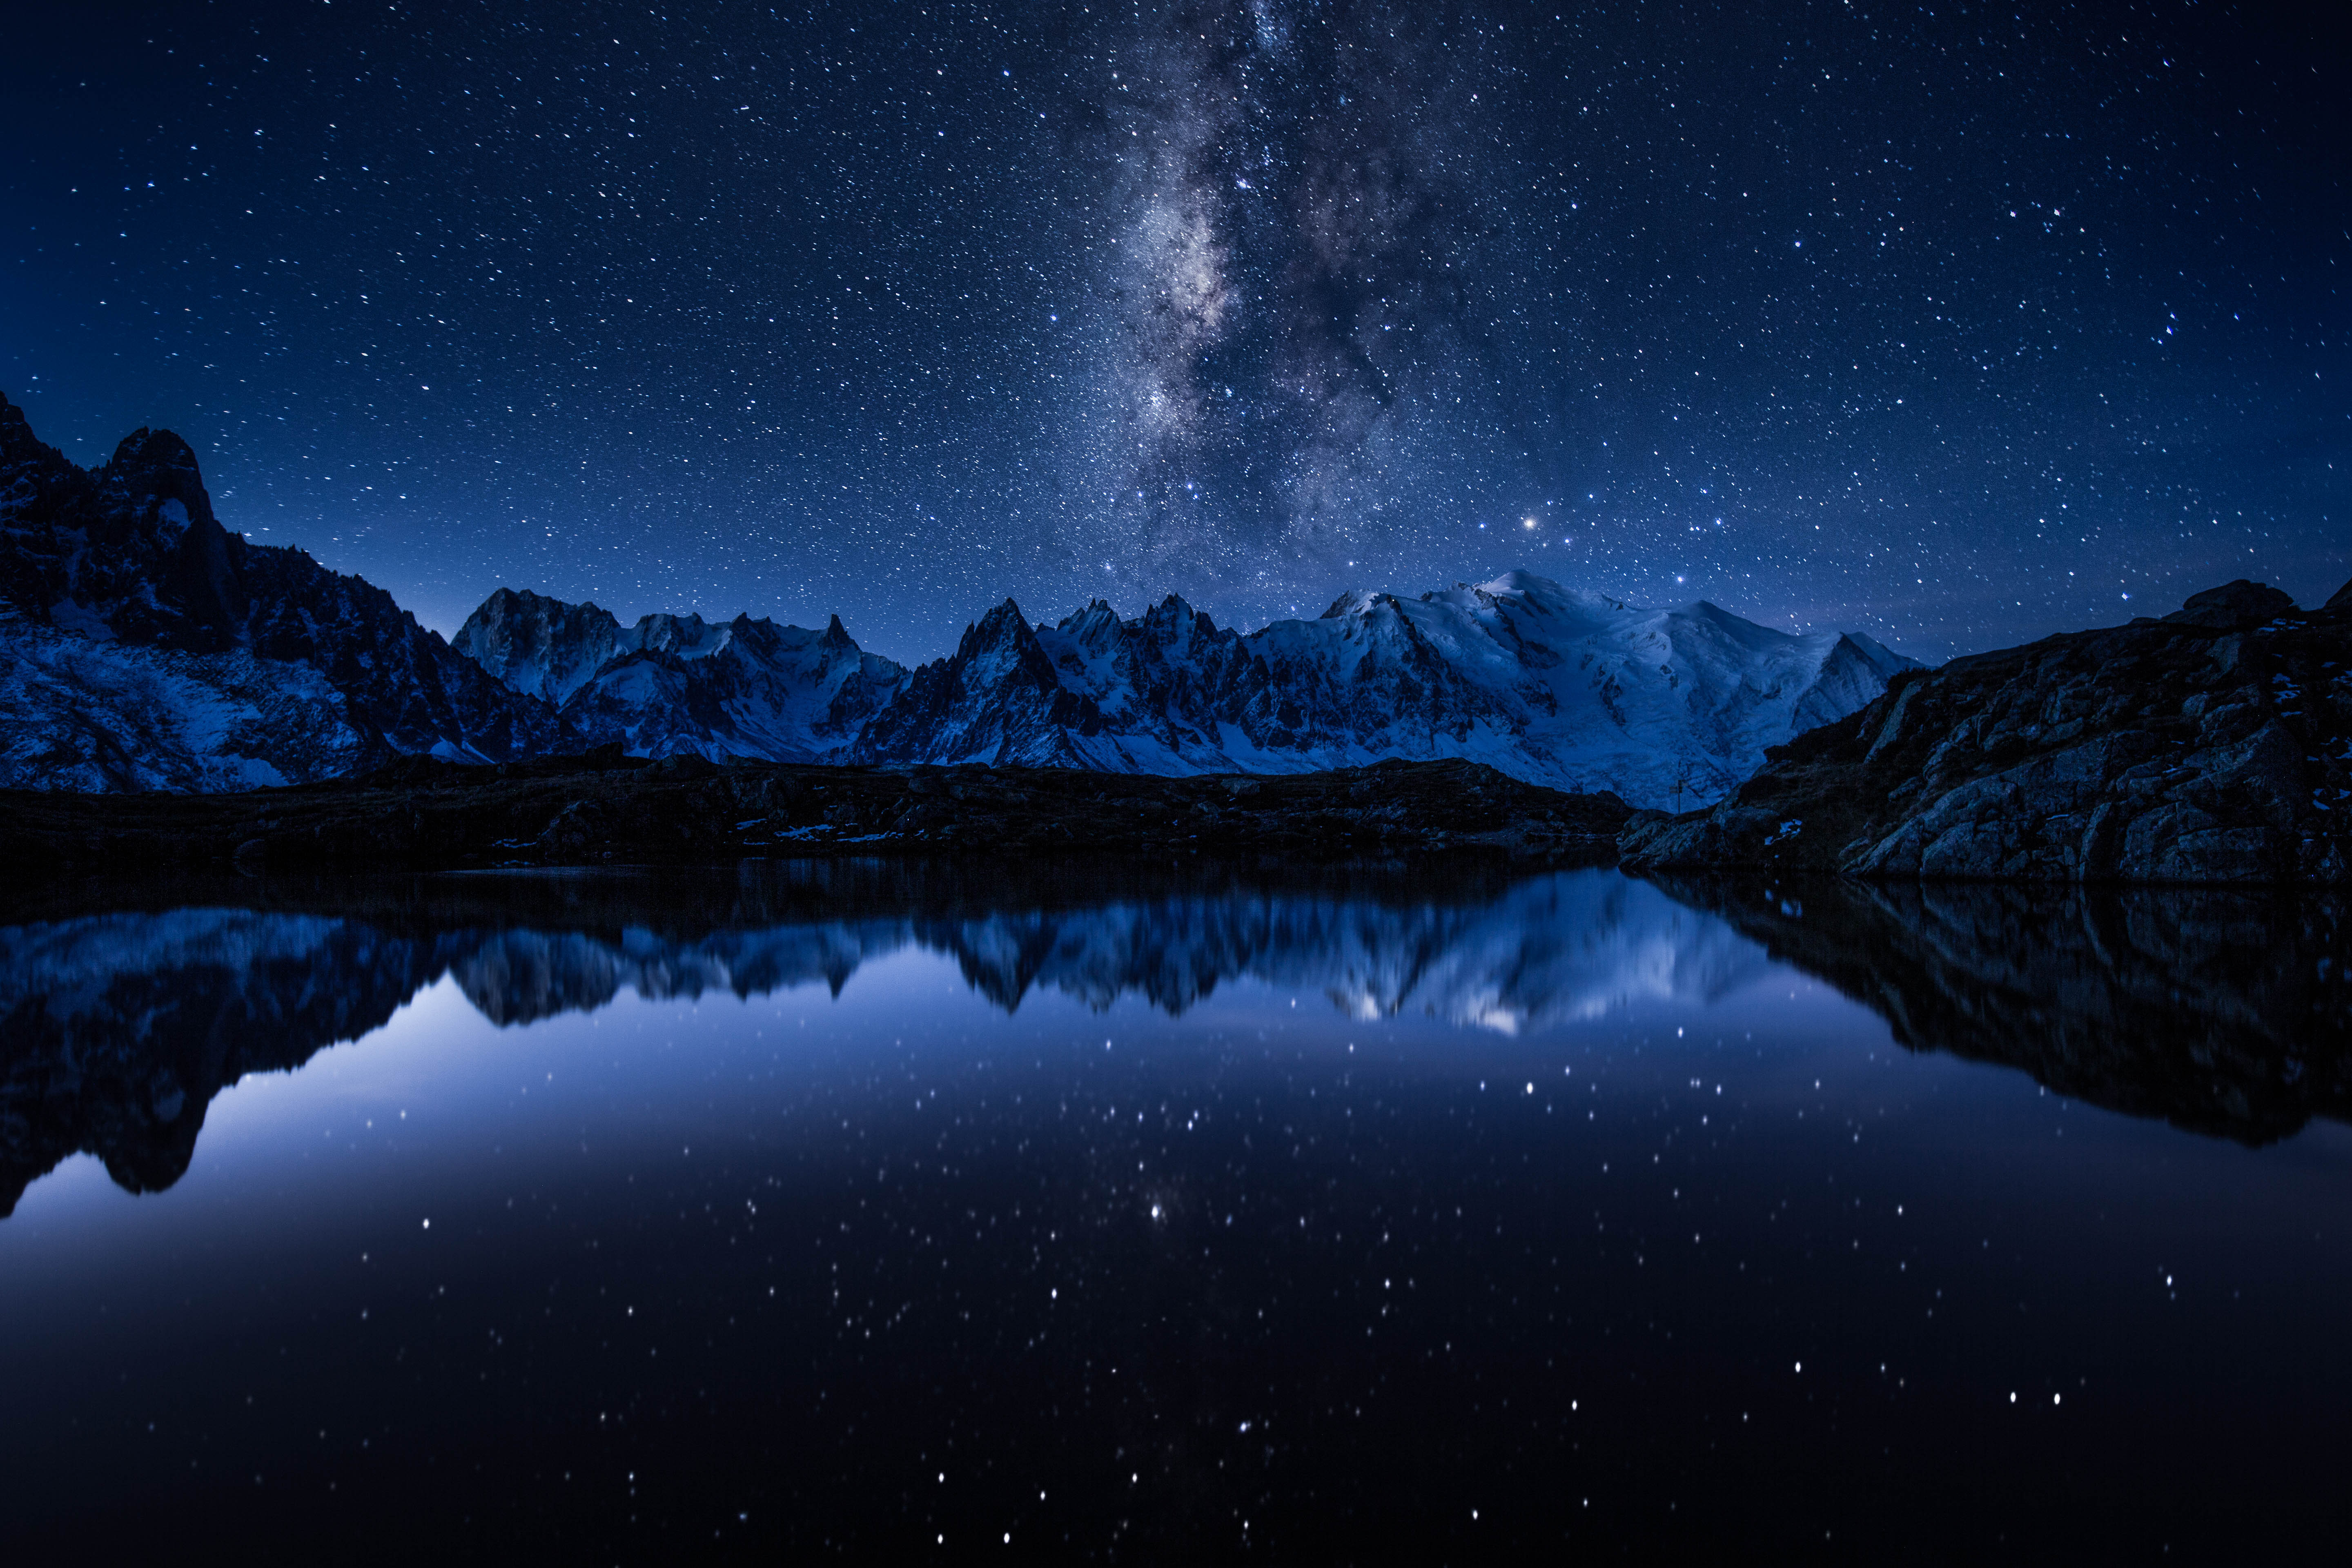 https://4kwallpapers.com/images/wallpapers/milky-way-starry-sky-night-mountains-lake-reflection-cold-5k-5760x3840-287.jpg